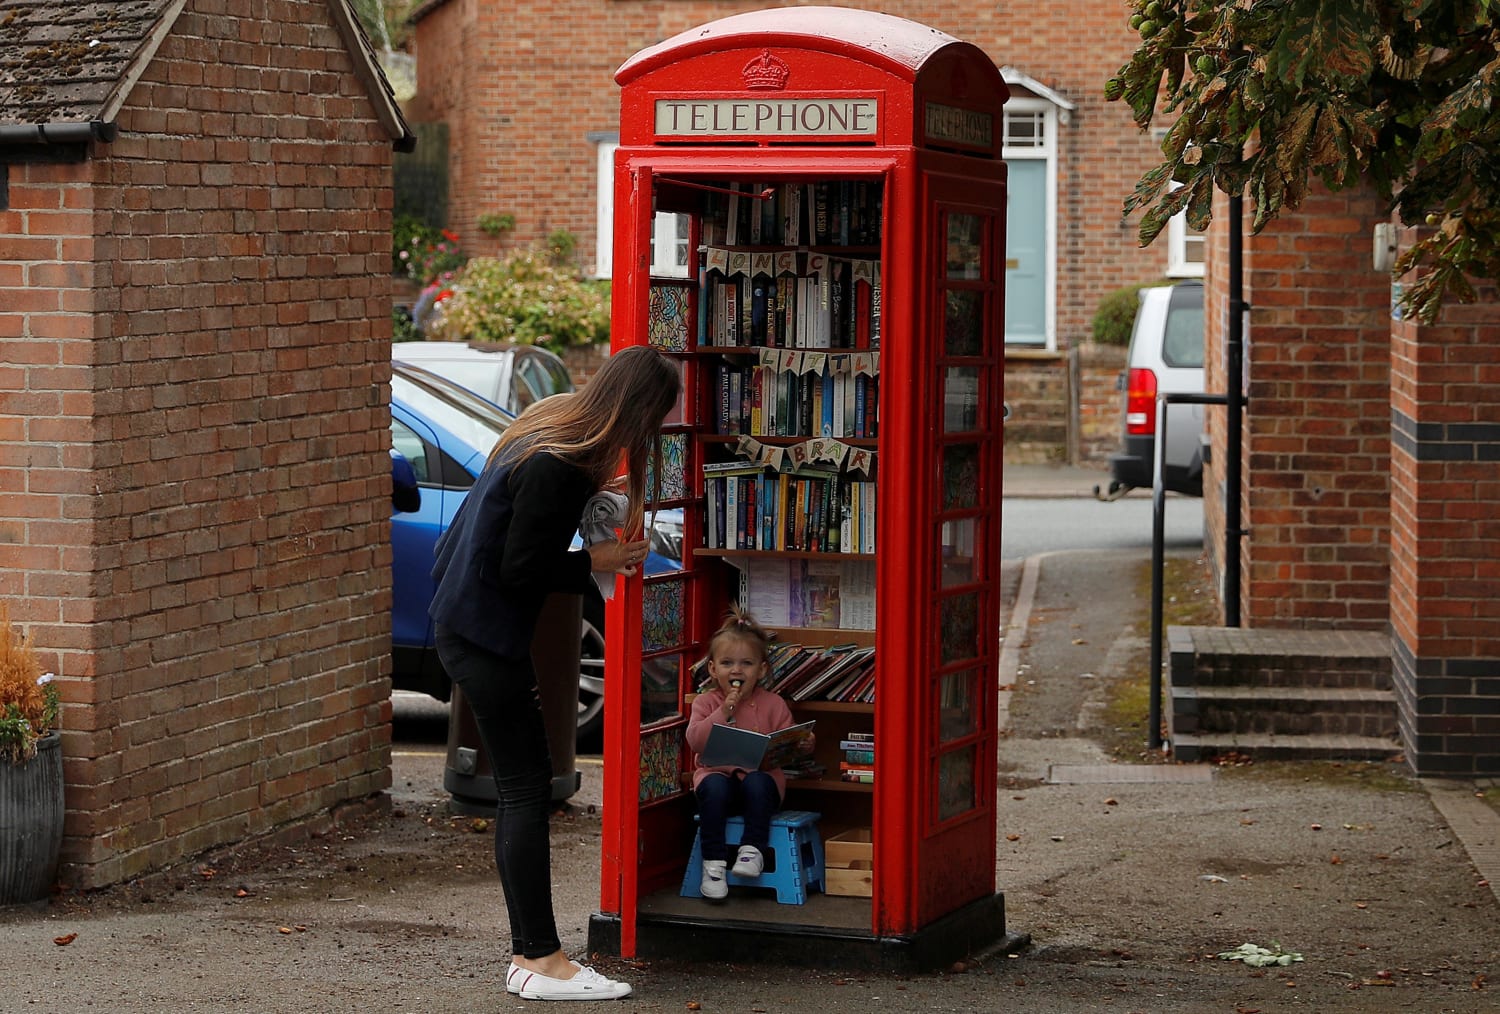 Britain's red phone boxes stores, even a photo booth